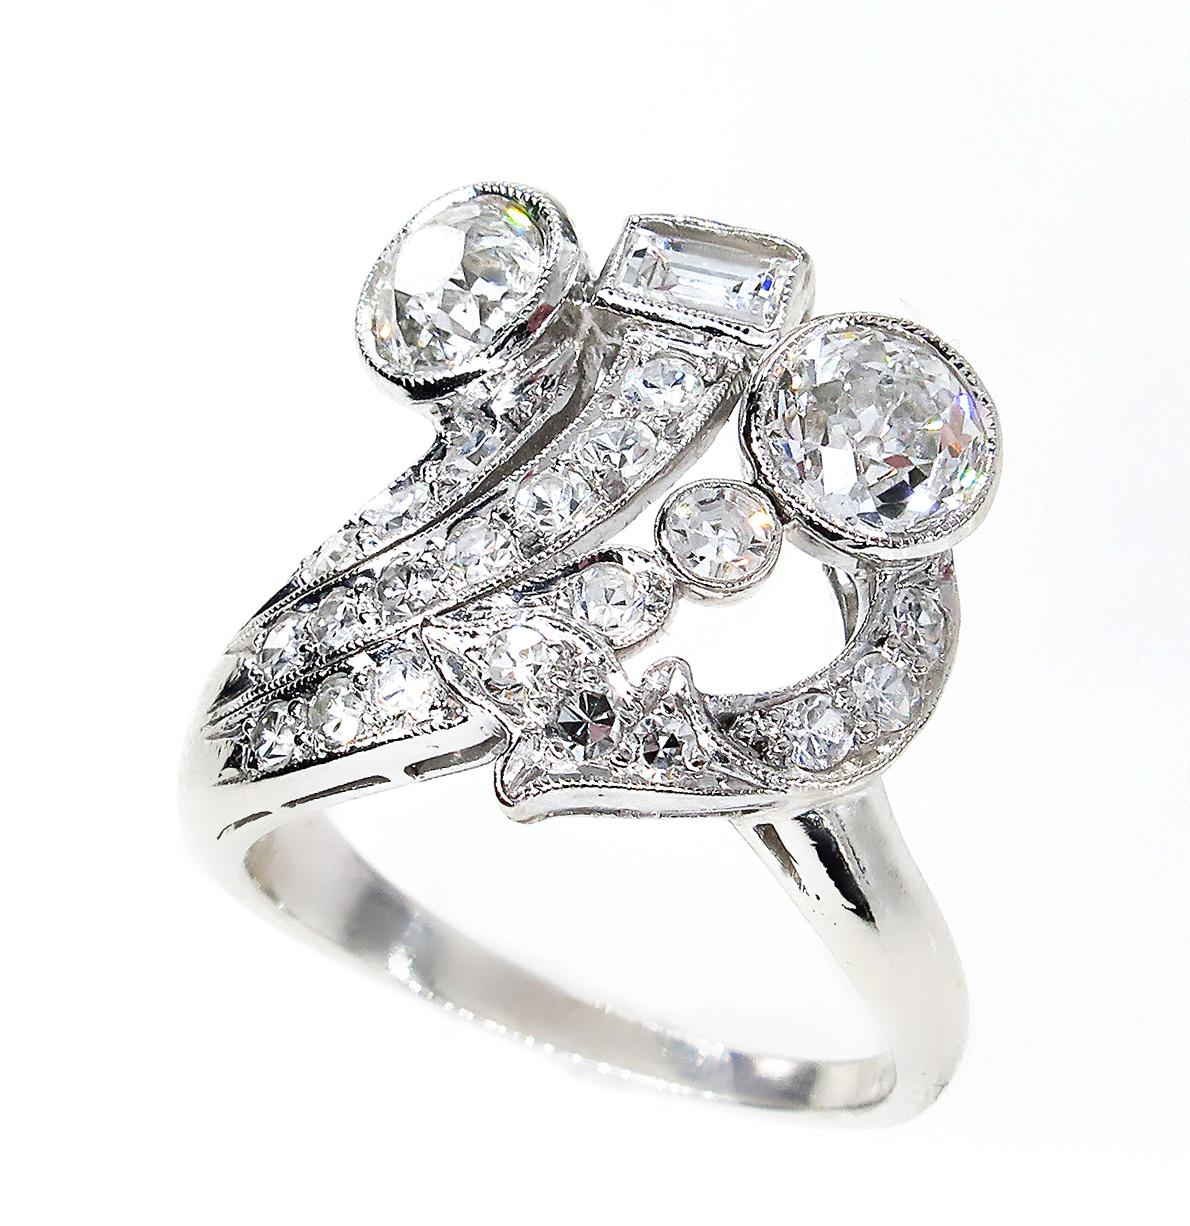 The artfully sculpted, multidimensional mounting combines baguette and Old cut round diamonds for a brilliant , almost a peacock effect.
We estimate the vintage of this ring to be from the 1920s through the 1930s. This is a truly remarkable and